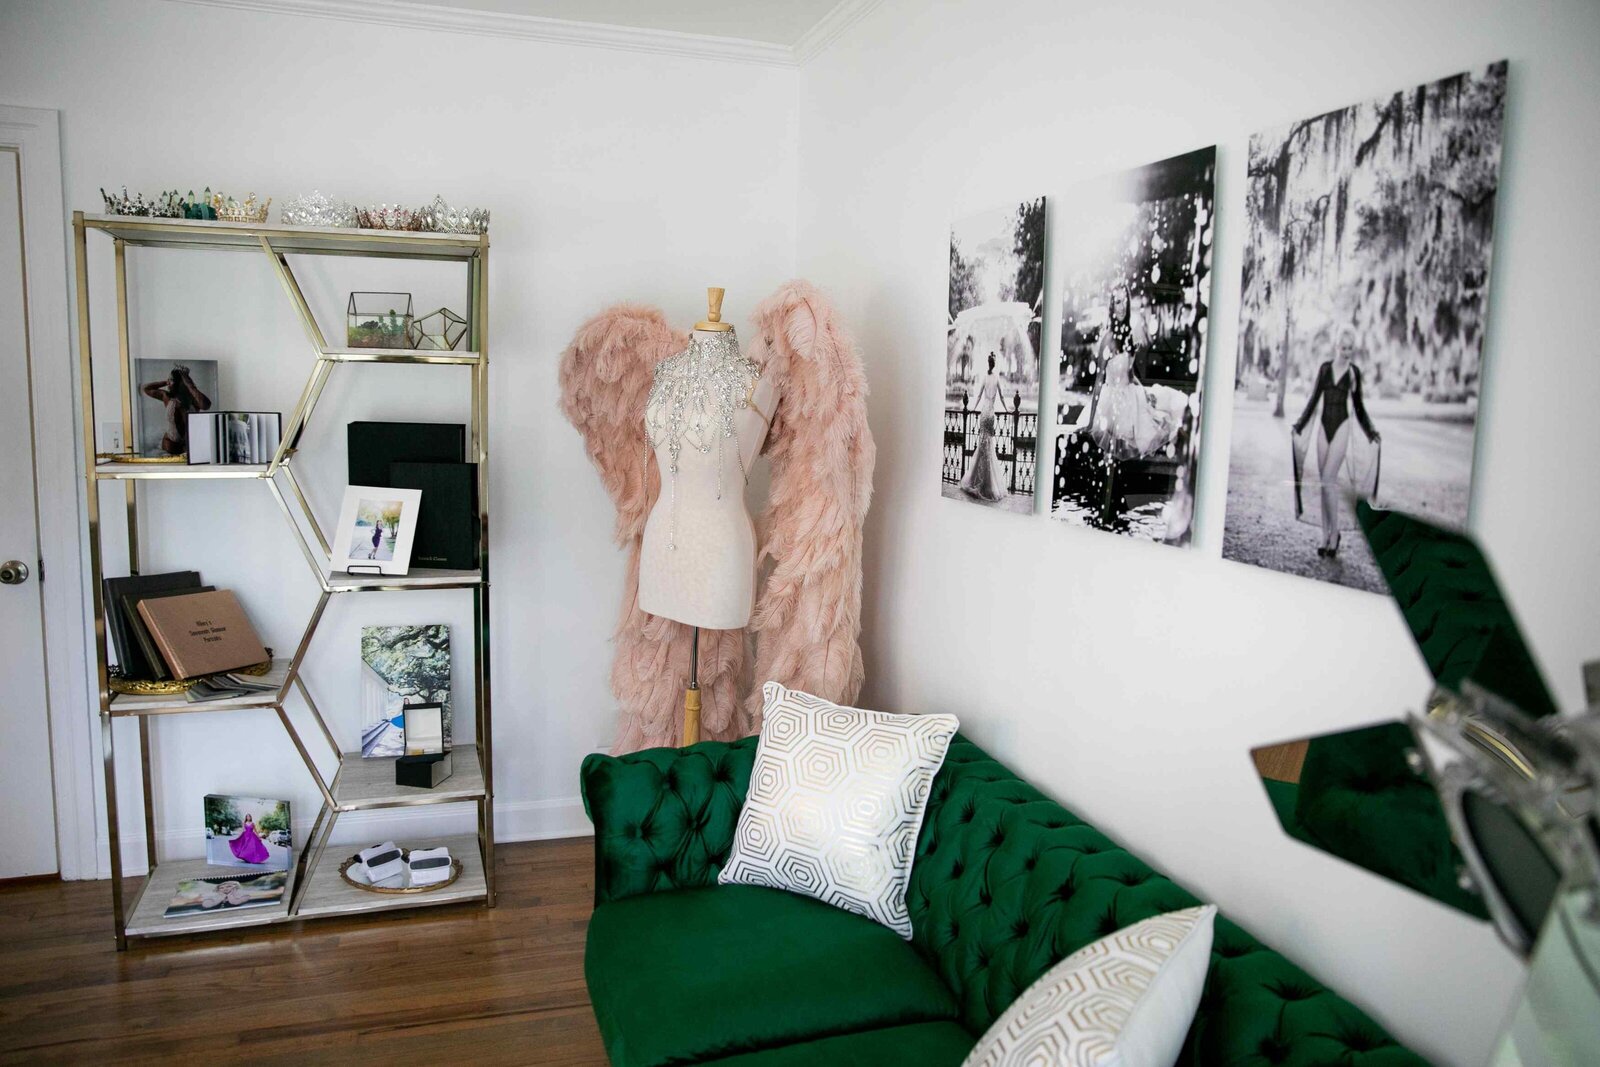 green sofa, wall prints, pink wings and product display case